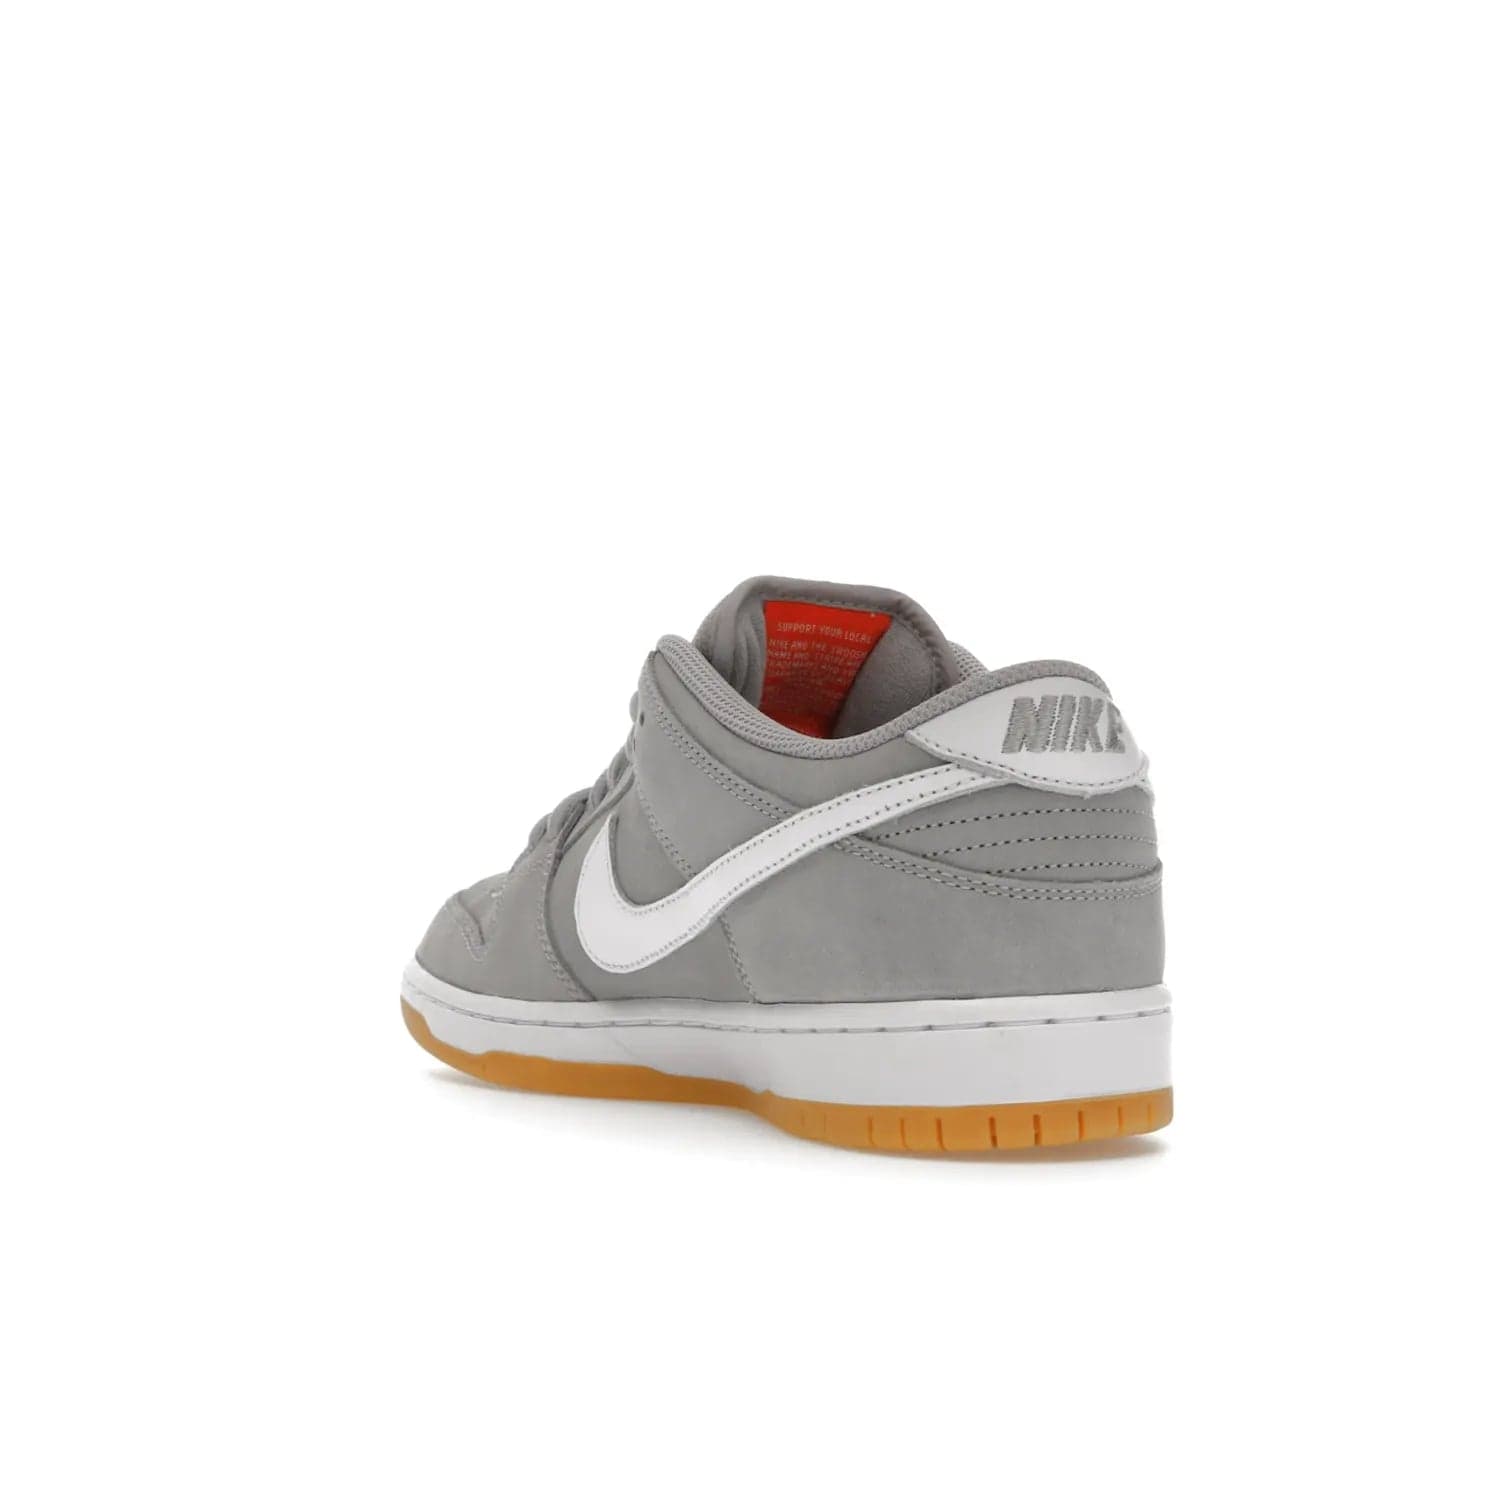 Nike SB Dunk Low Pro ISO Orange Label Wolf Grey Gum - Image 25 - Only at www.BallersClubKickz.com - Introducing Nike's SB Dunk Low Pro ISO Orange Label Wolf Grey Gum - a stylish shoe with a premium Wolf Grey upper, white leather Nike Swoosh, and an eye-catching gum outsole. With special Nike branding and packaging, this shoe adds a unique fashion statement. Out Feb. 24, 2023.